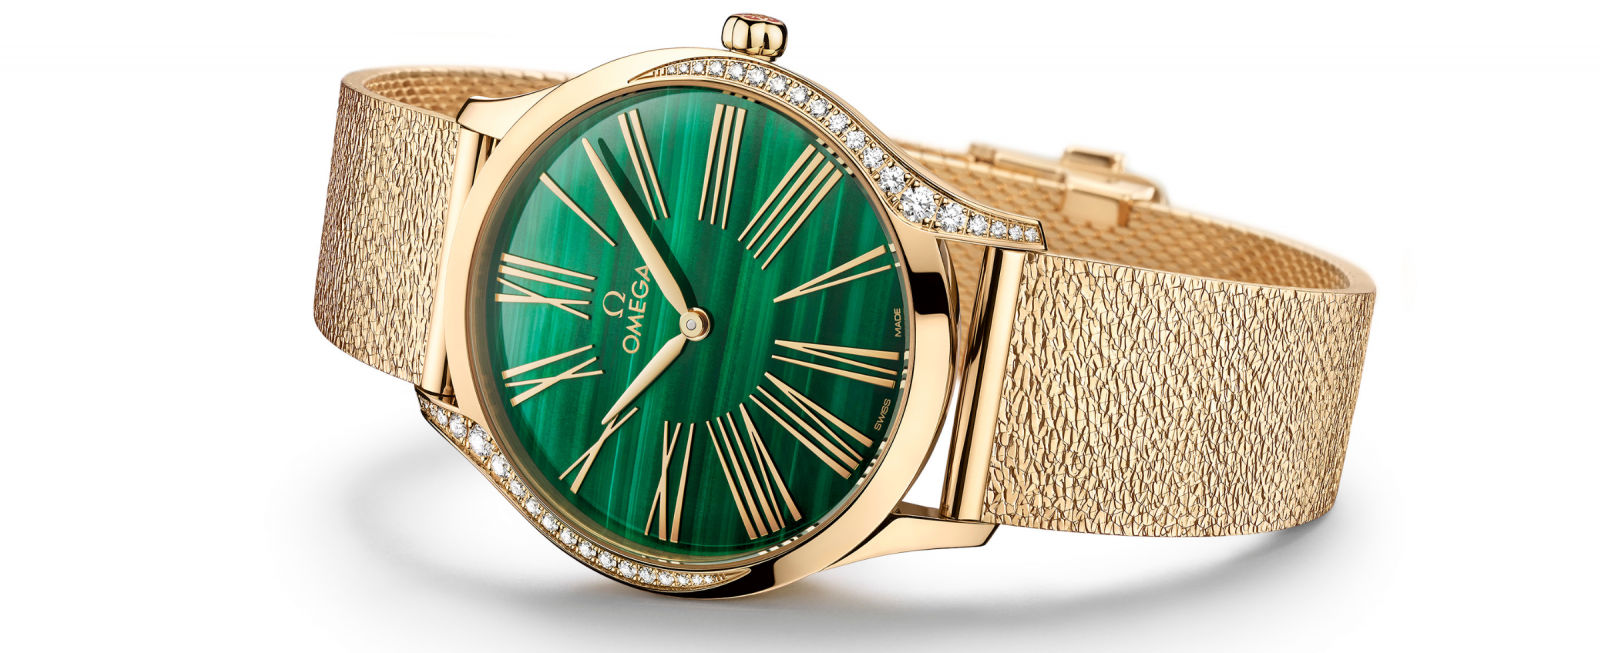 Malachite dials elevate the elegance and sophistication of Omega Trésor timepieces